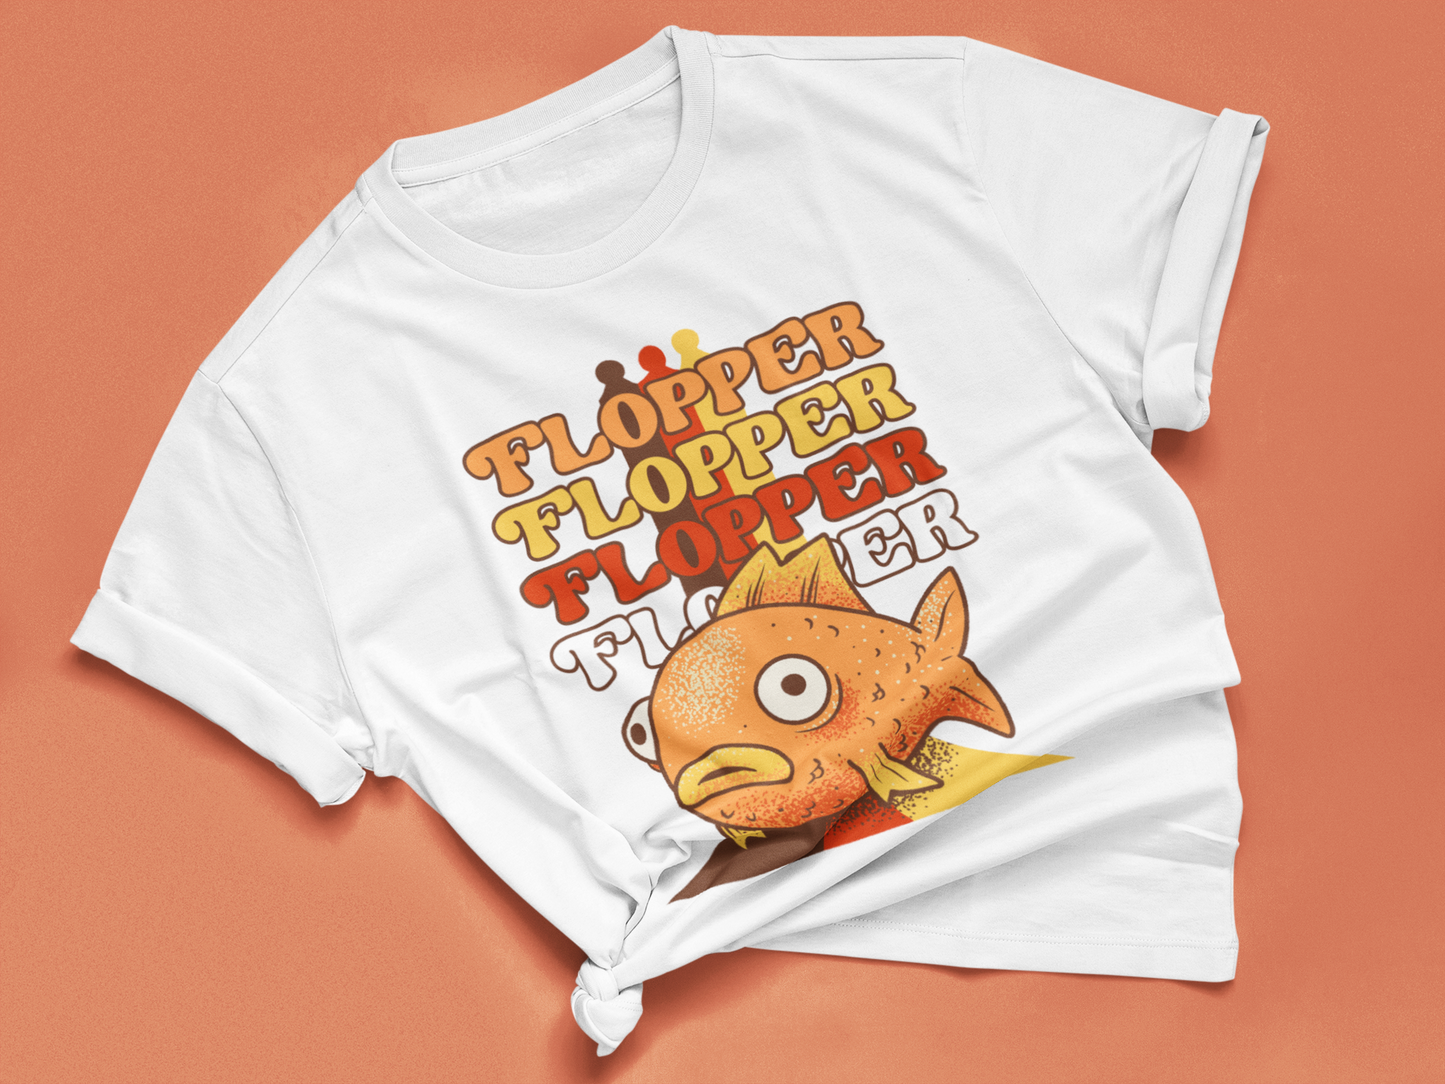 Flopper Flopper Flopper Flopper - Youth Sizes T-shirt for Pop Culture Whopper and Fortnite Lovers